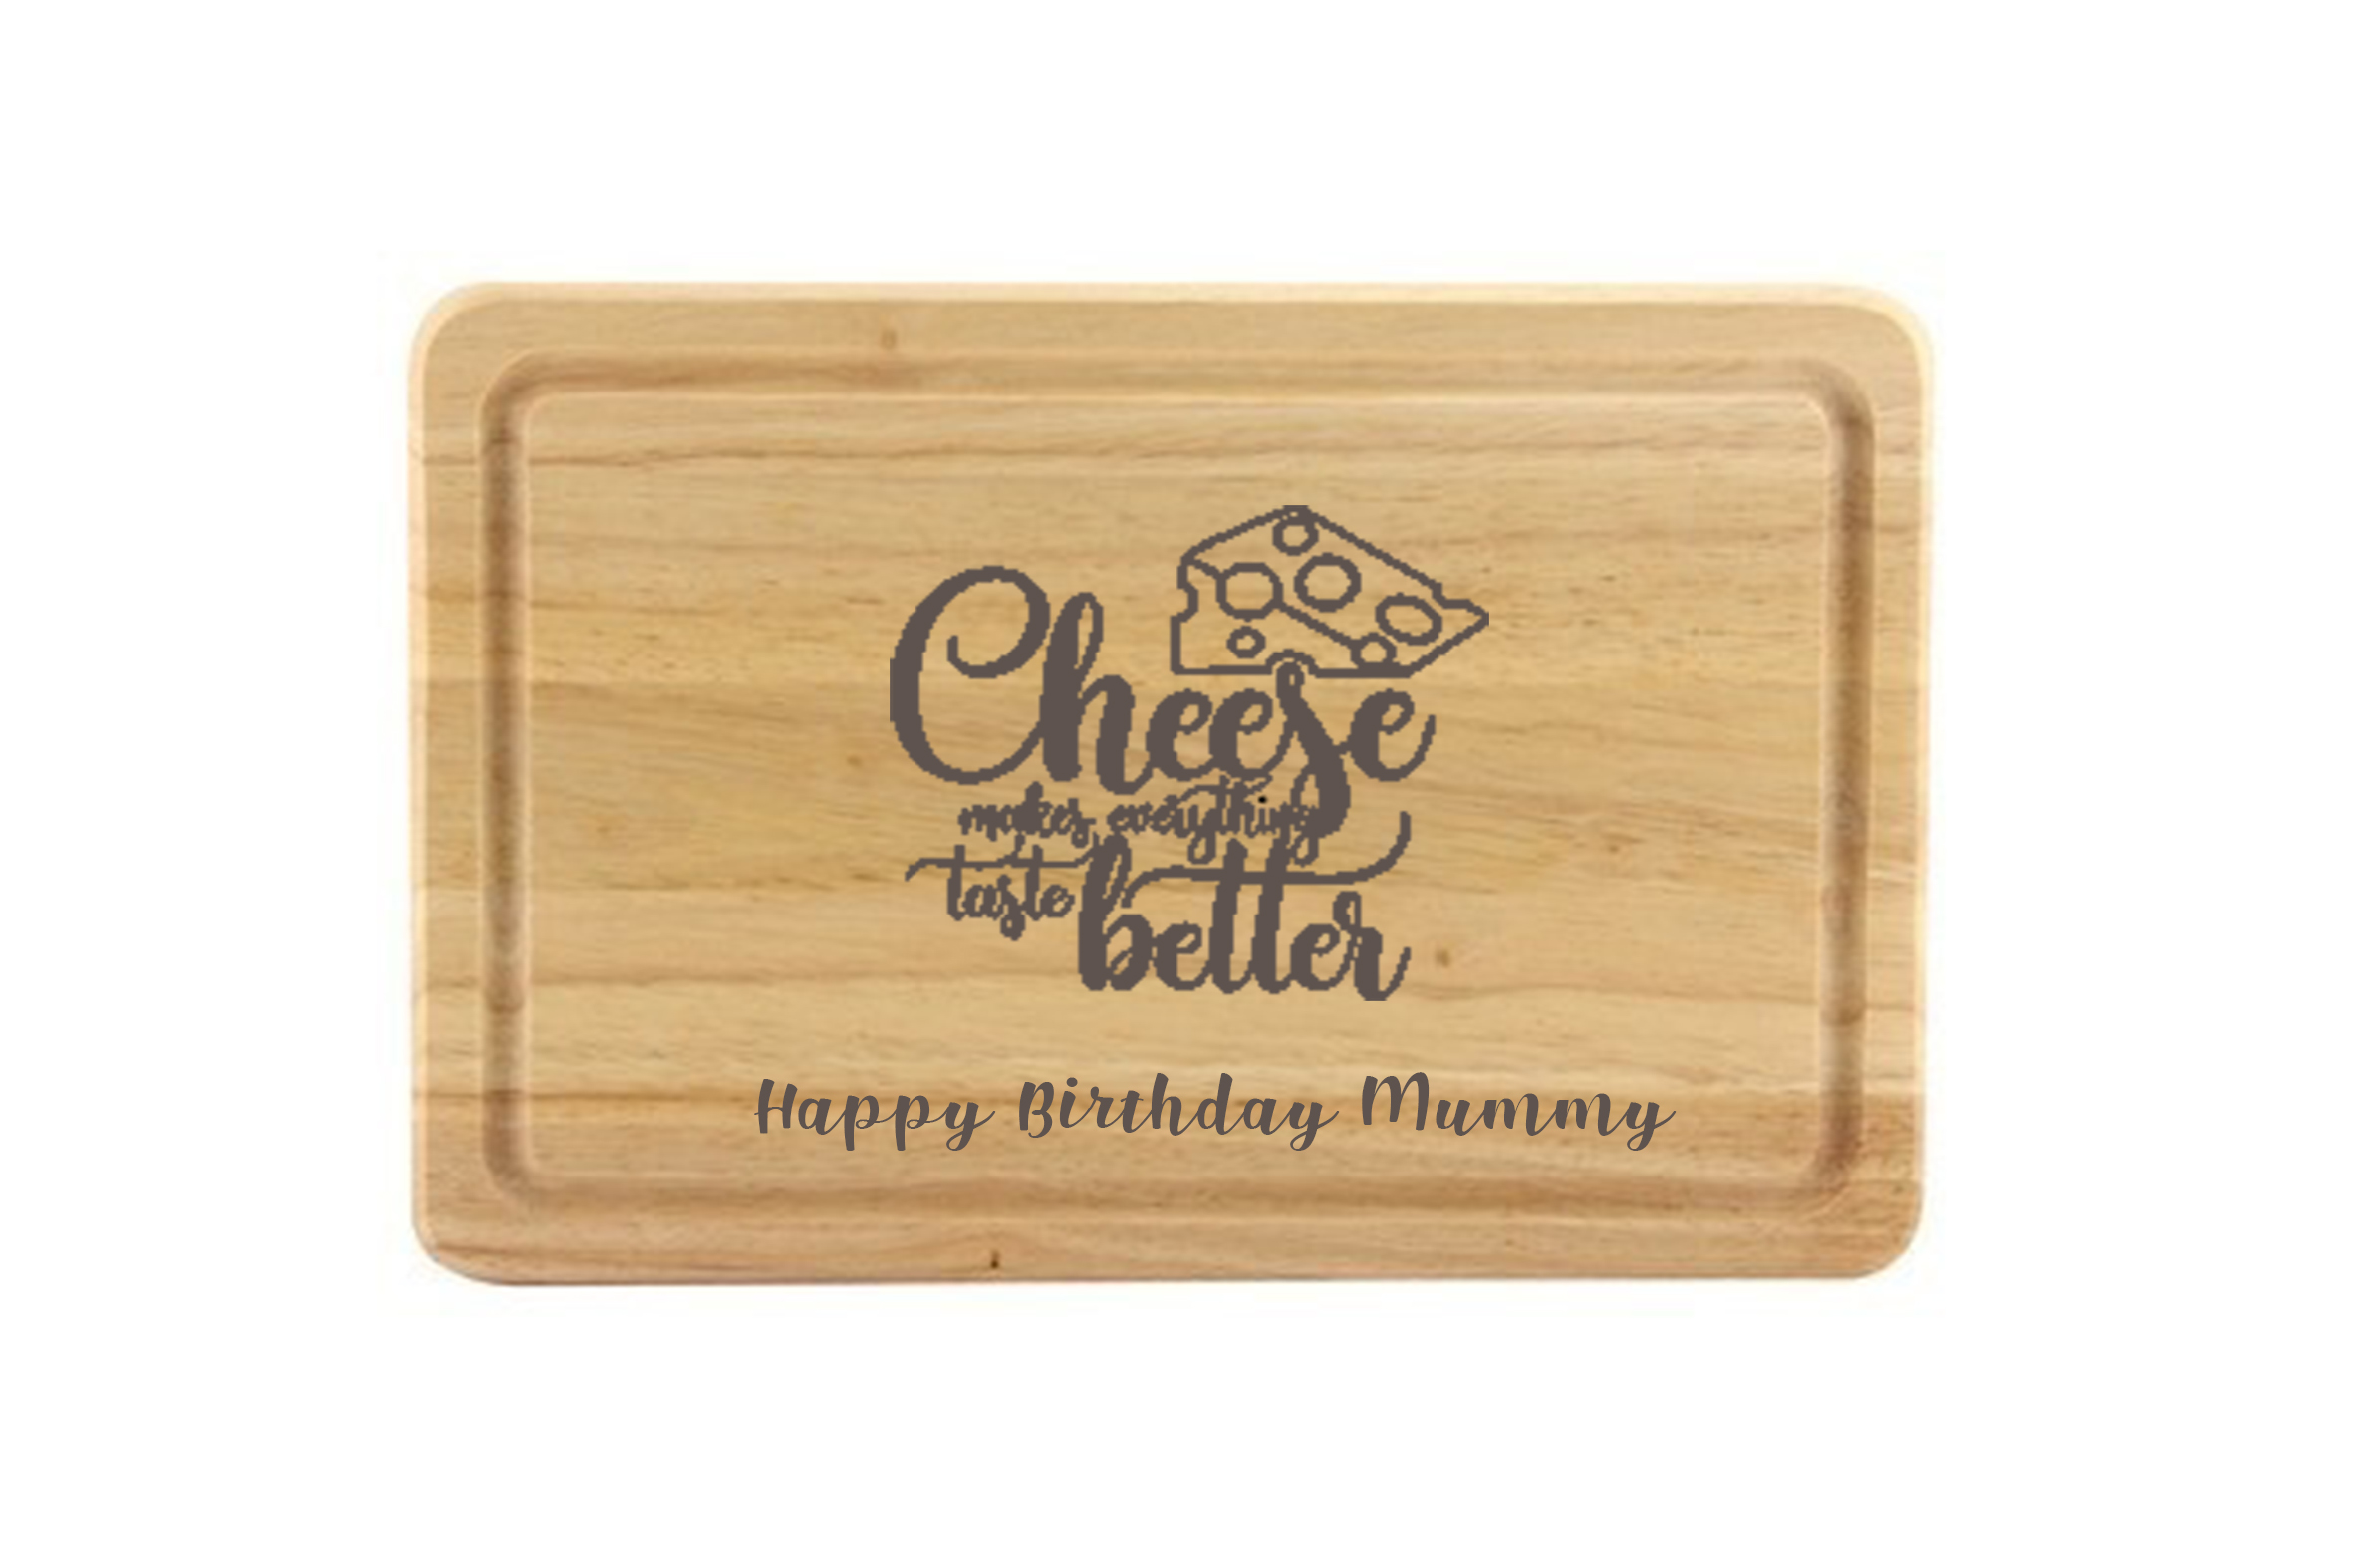 Personalied wooden chopping board. Personalised engraved beer glass. Beautiful engraved personalised gift for every occasion. Personalised gifts for daddy. This image is shown on the personalisation company website. Personalised and affordable gifts for every occassion. Visit www.the-personalisation-company.co.uk